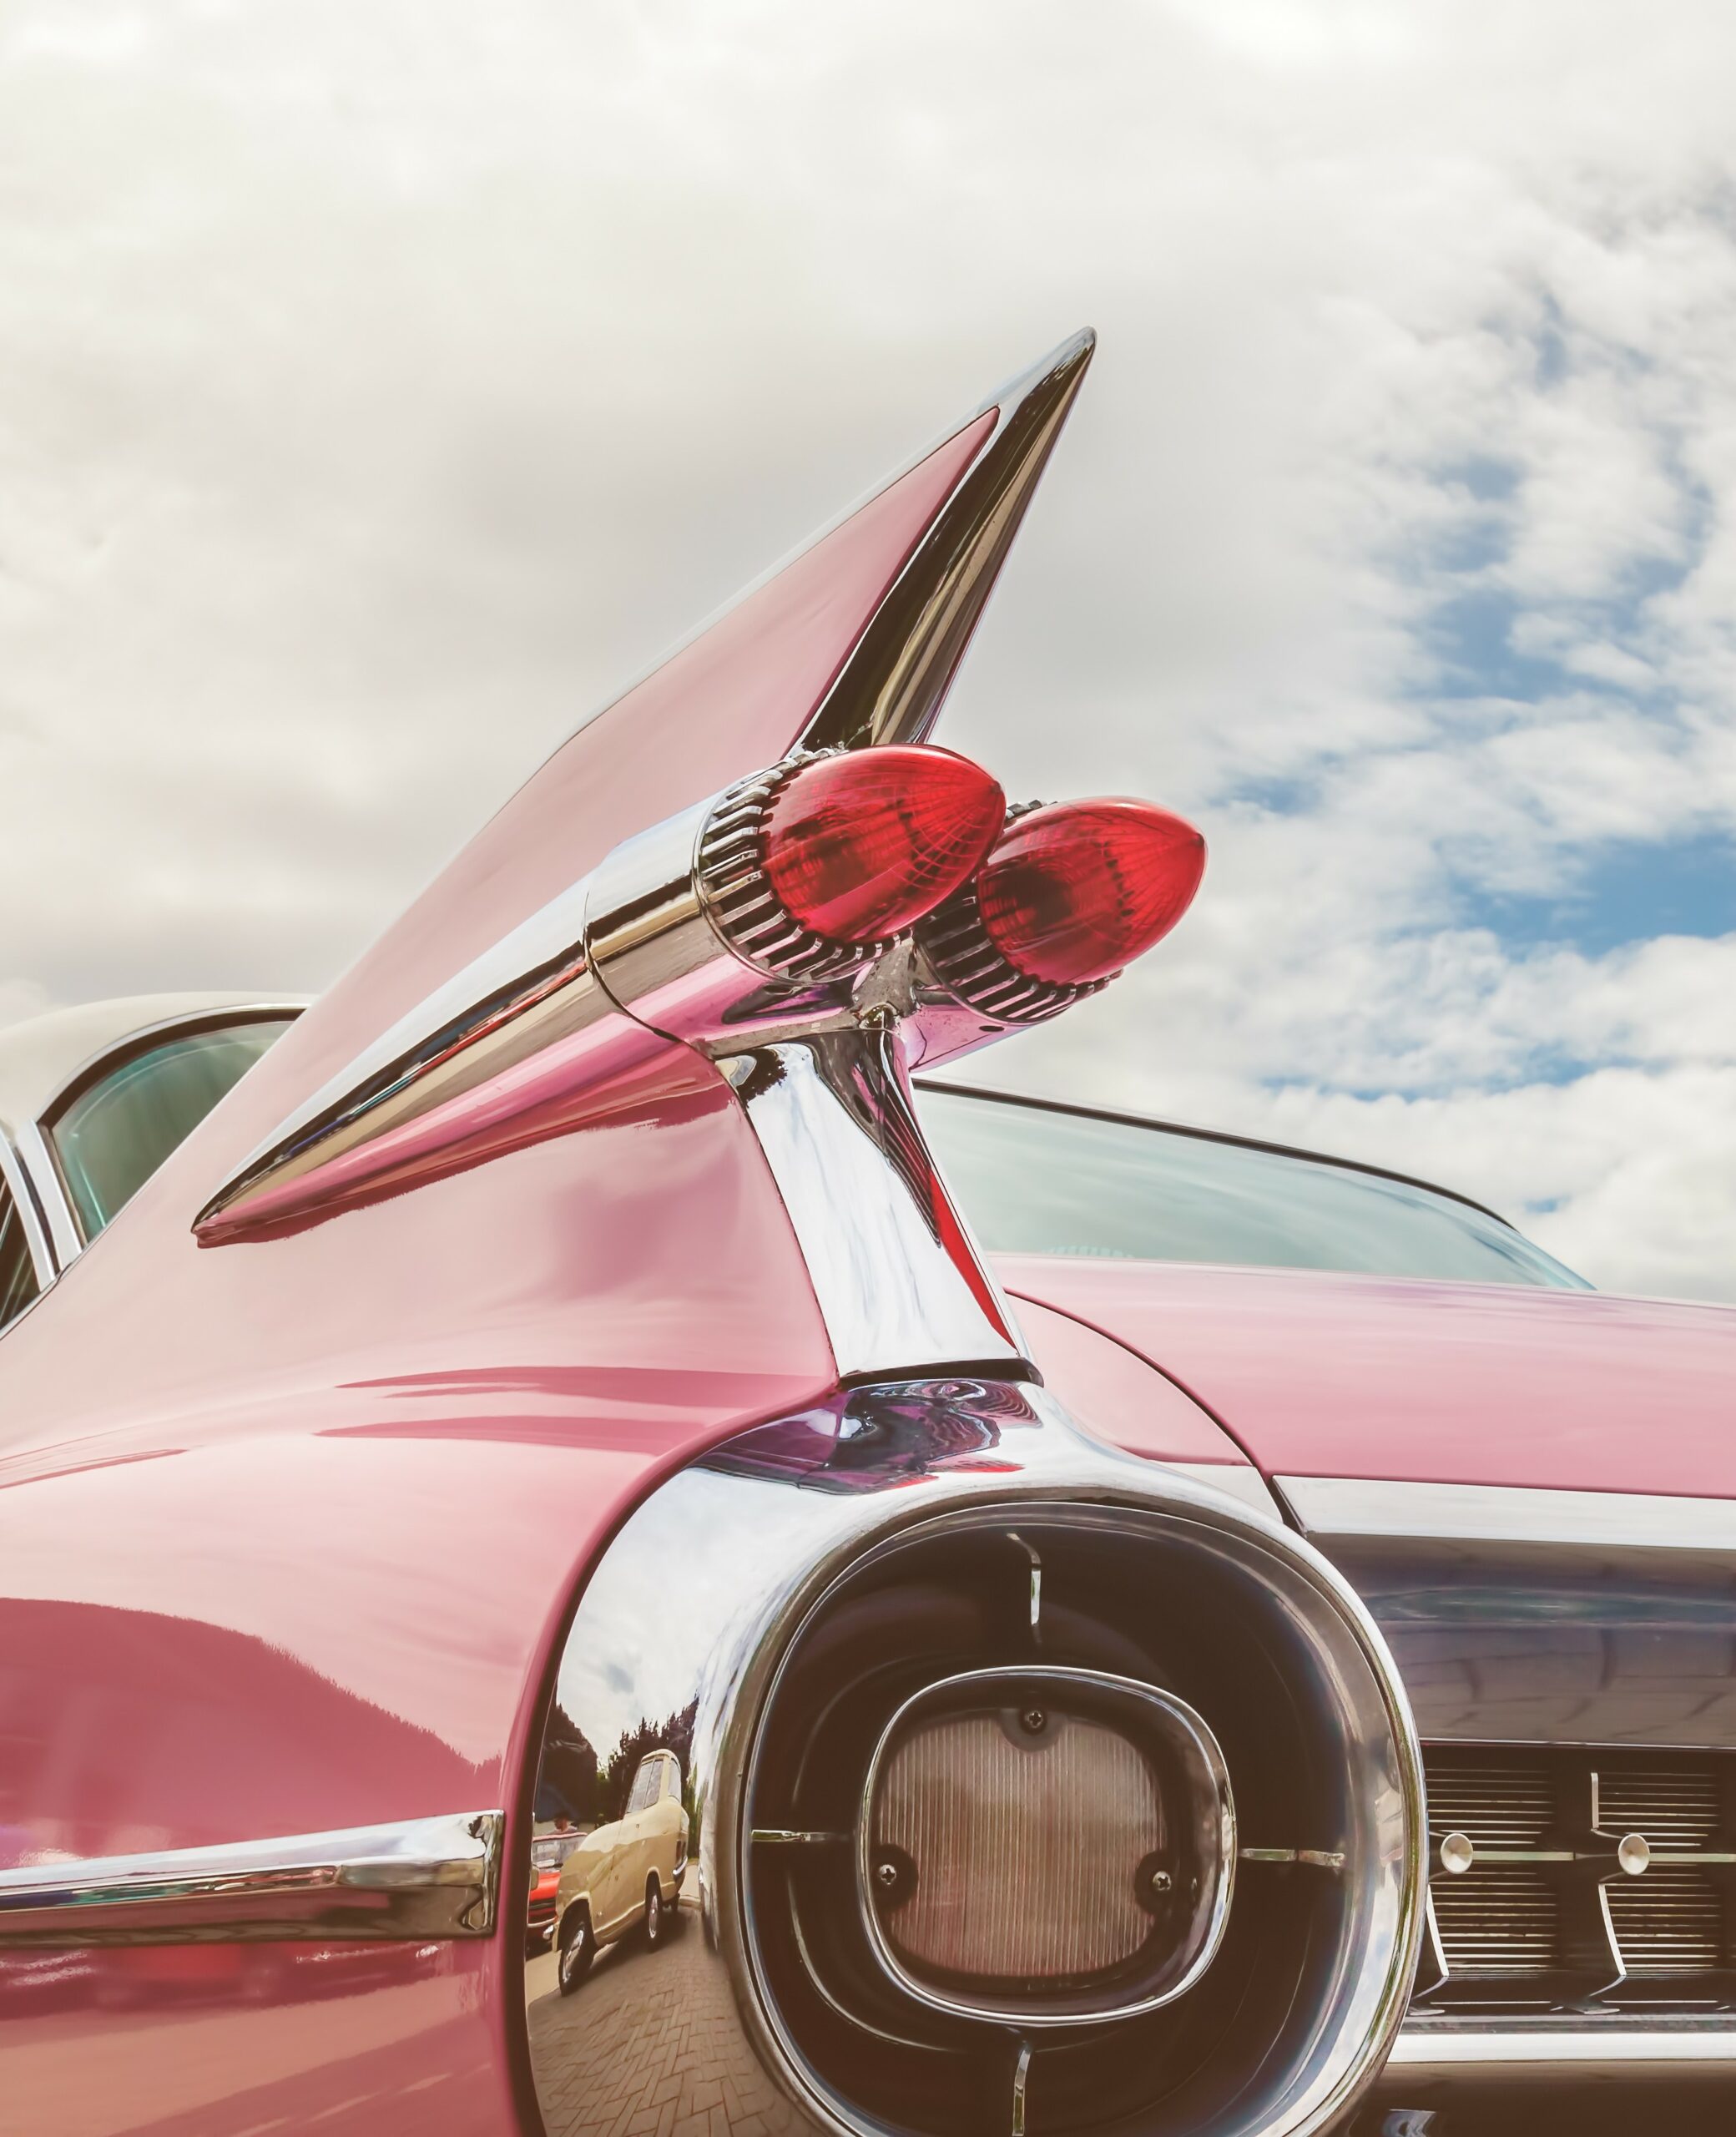 Retro styled image of the rear end of a pink classic car